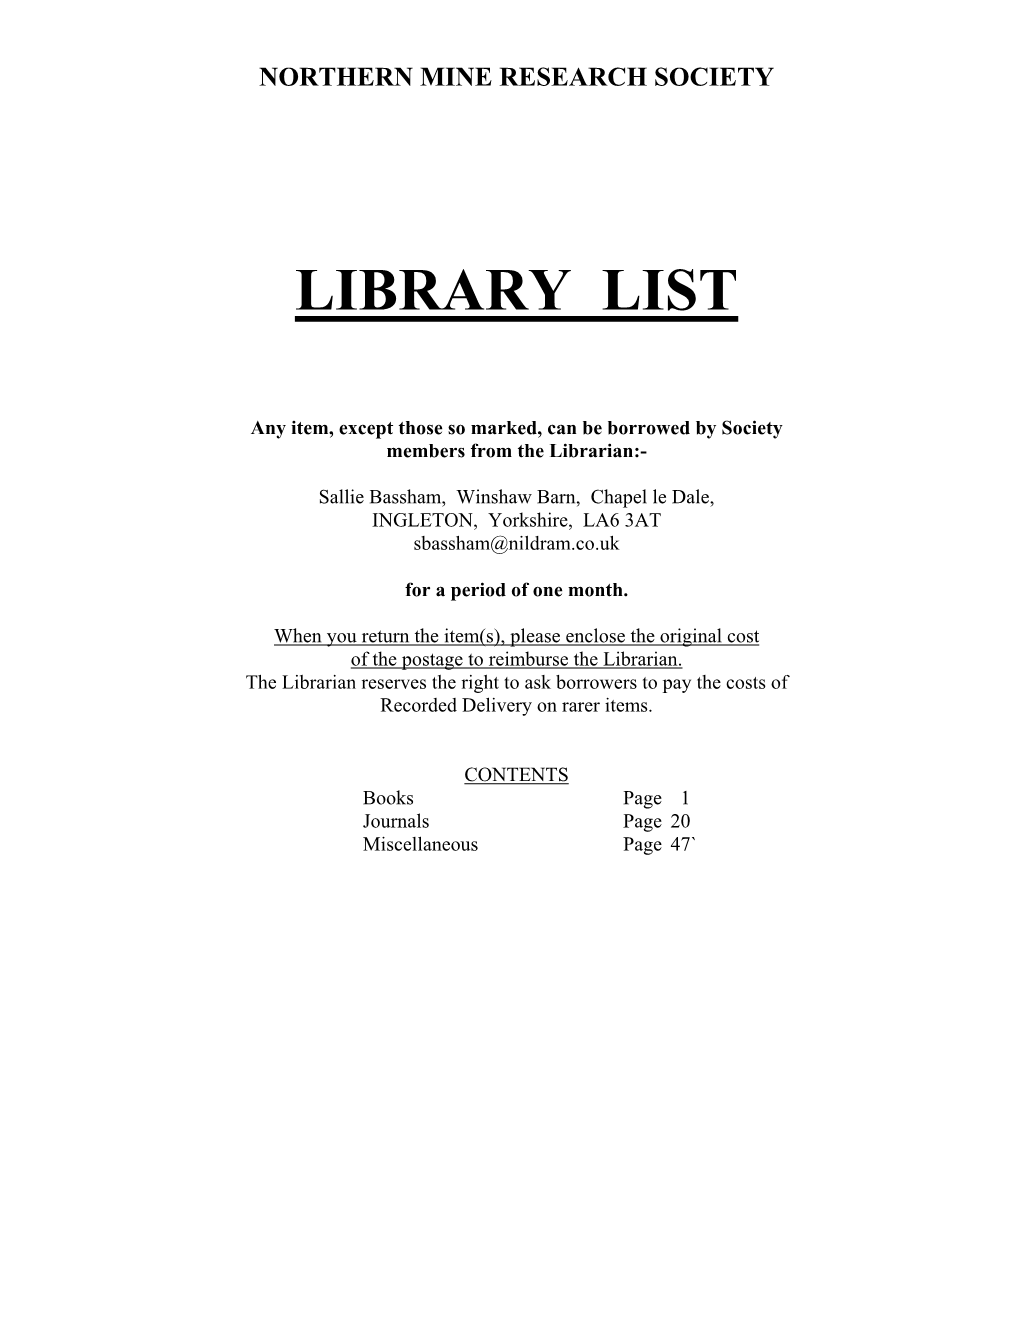 Library List